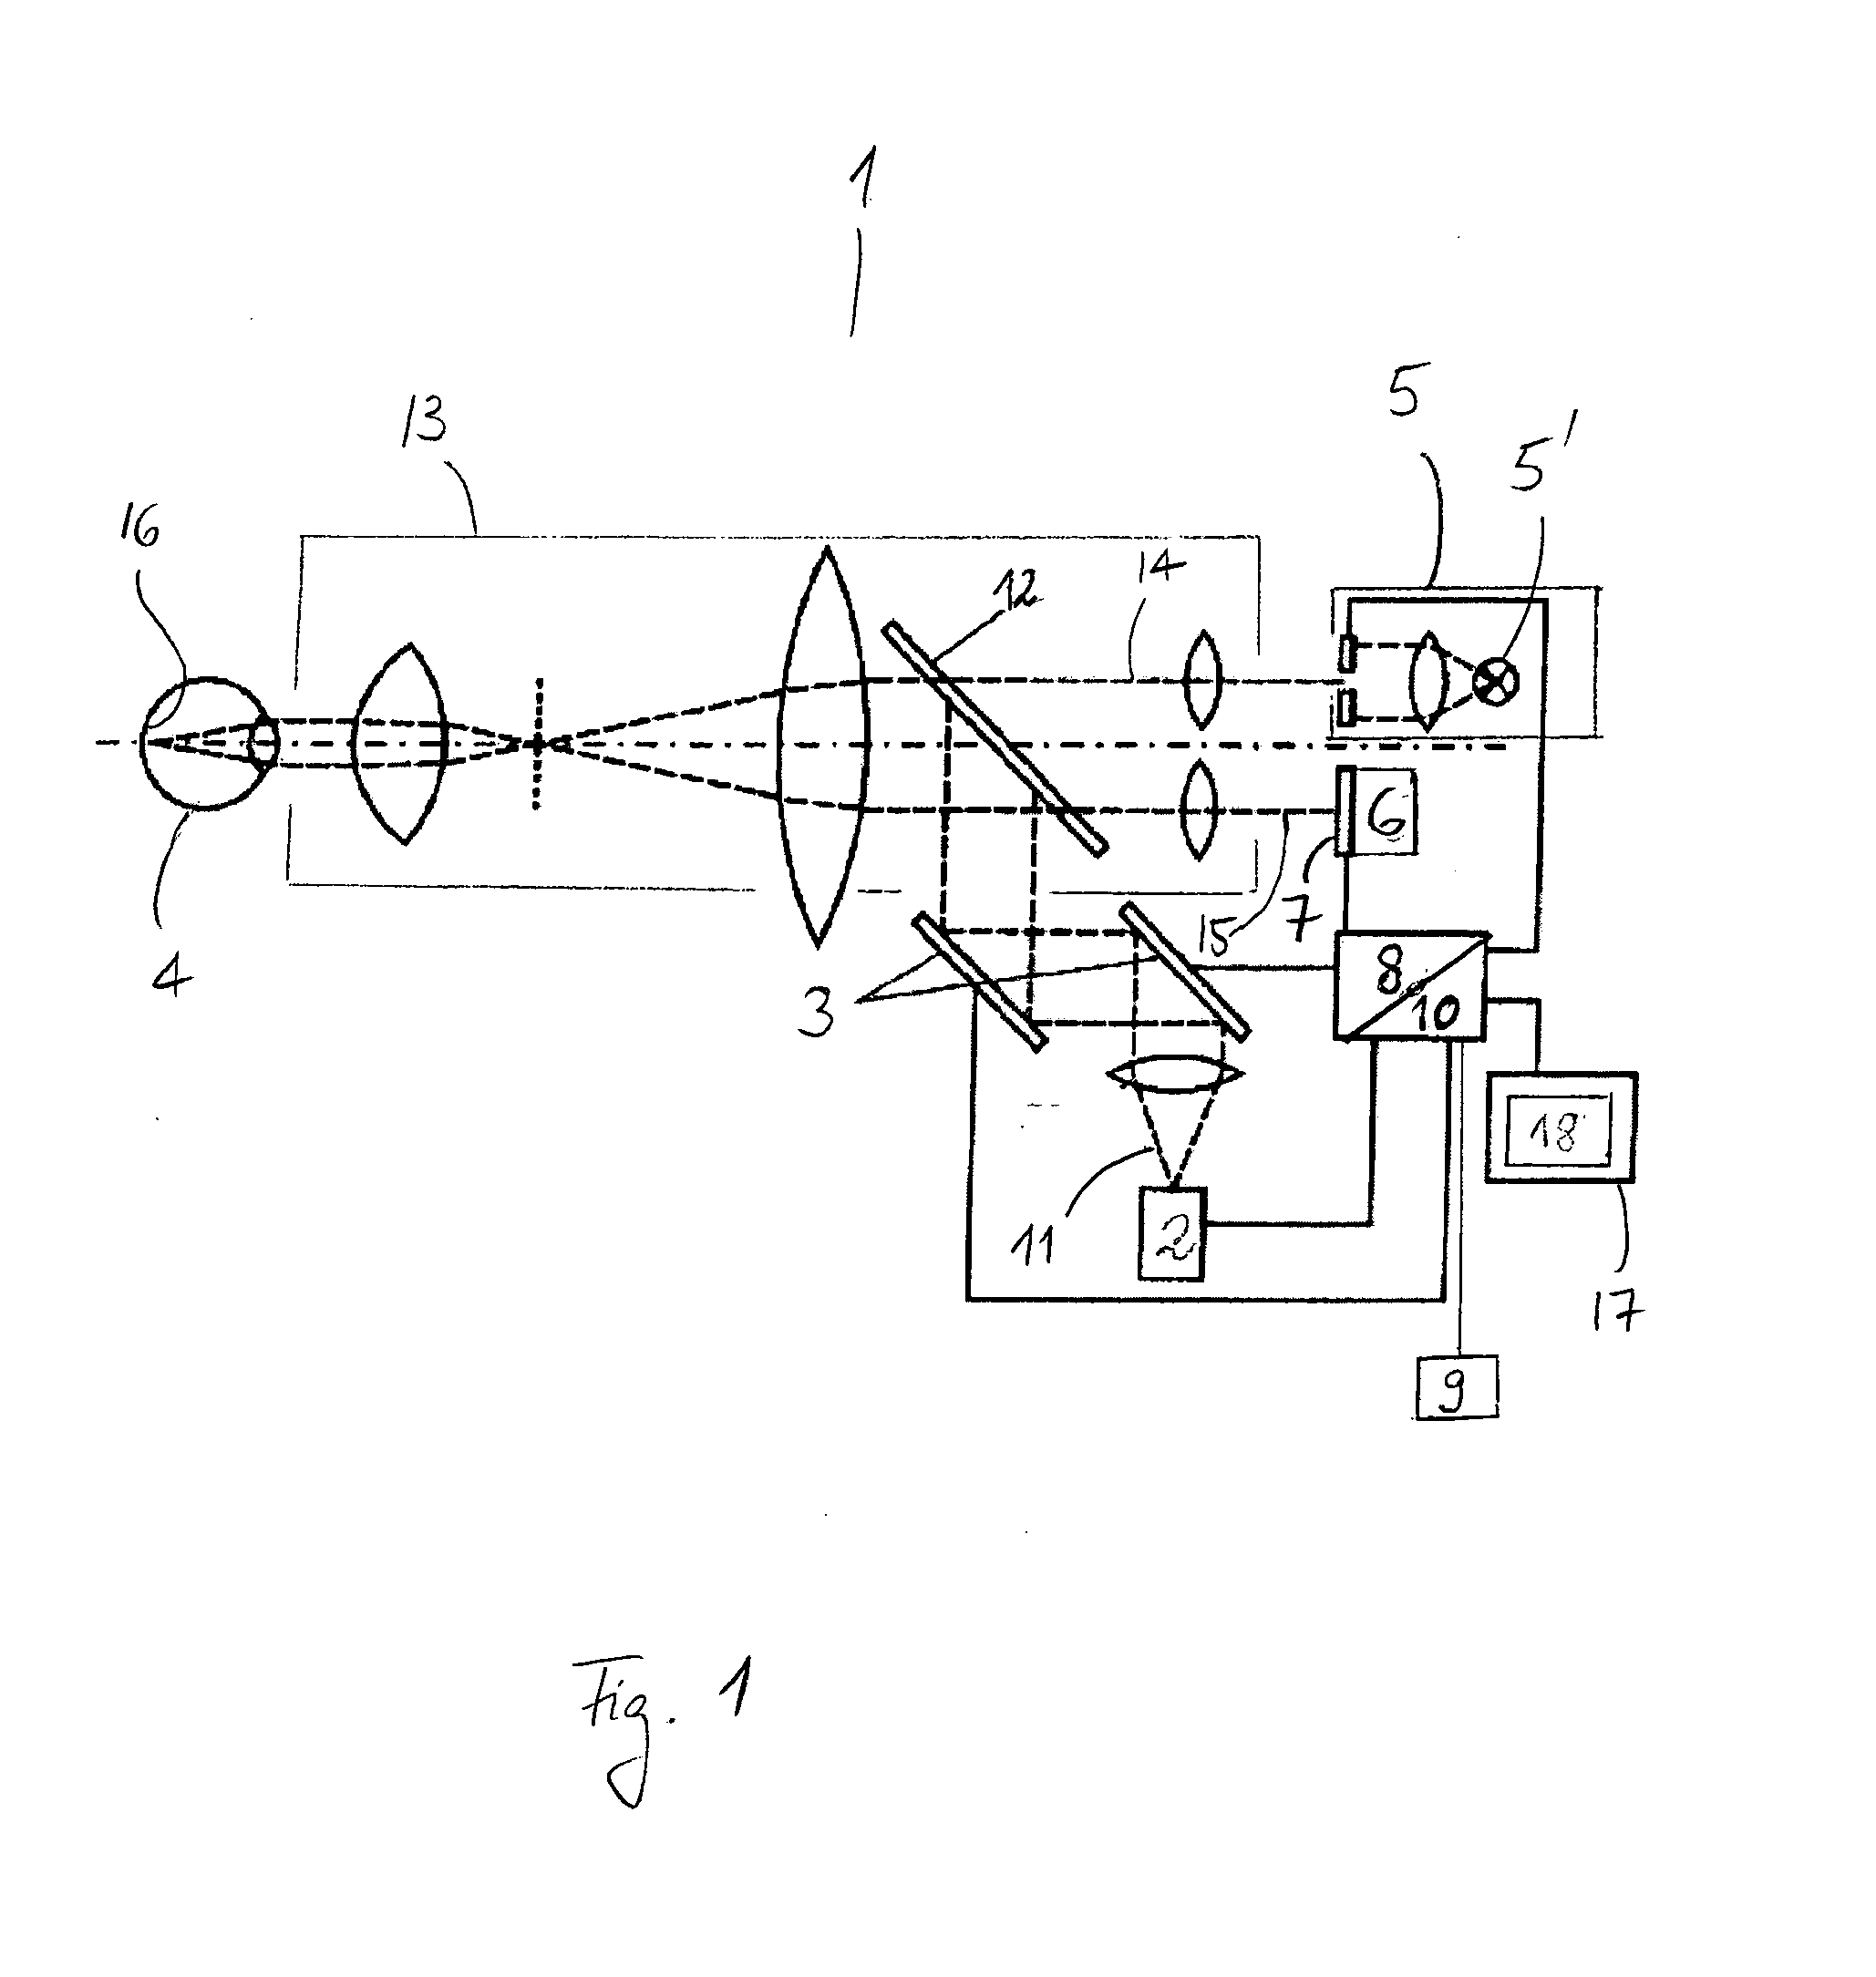 Ophthalmoscope having a laser device